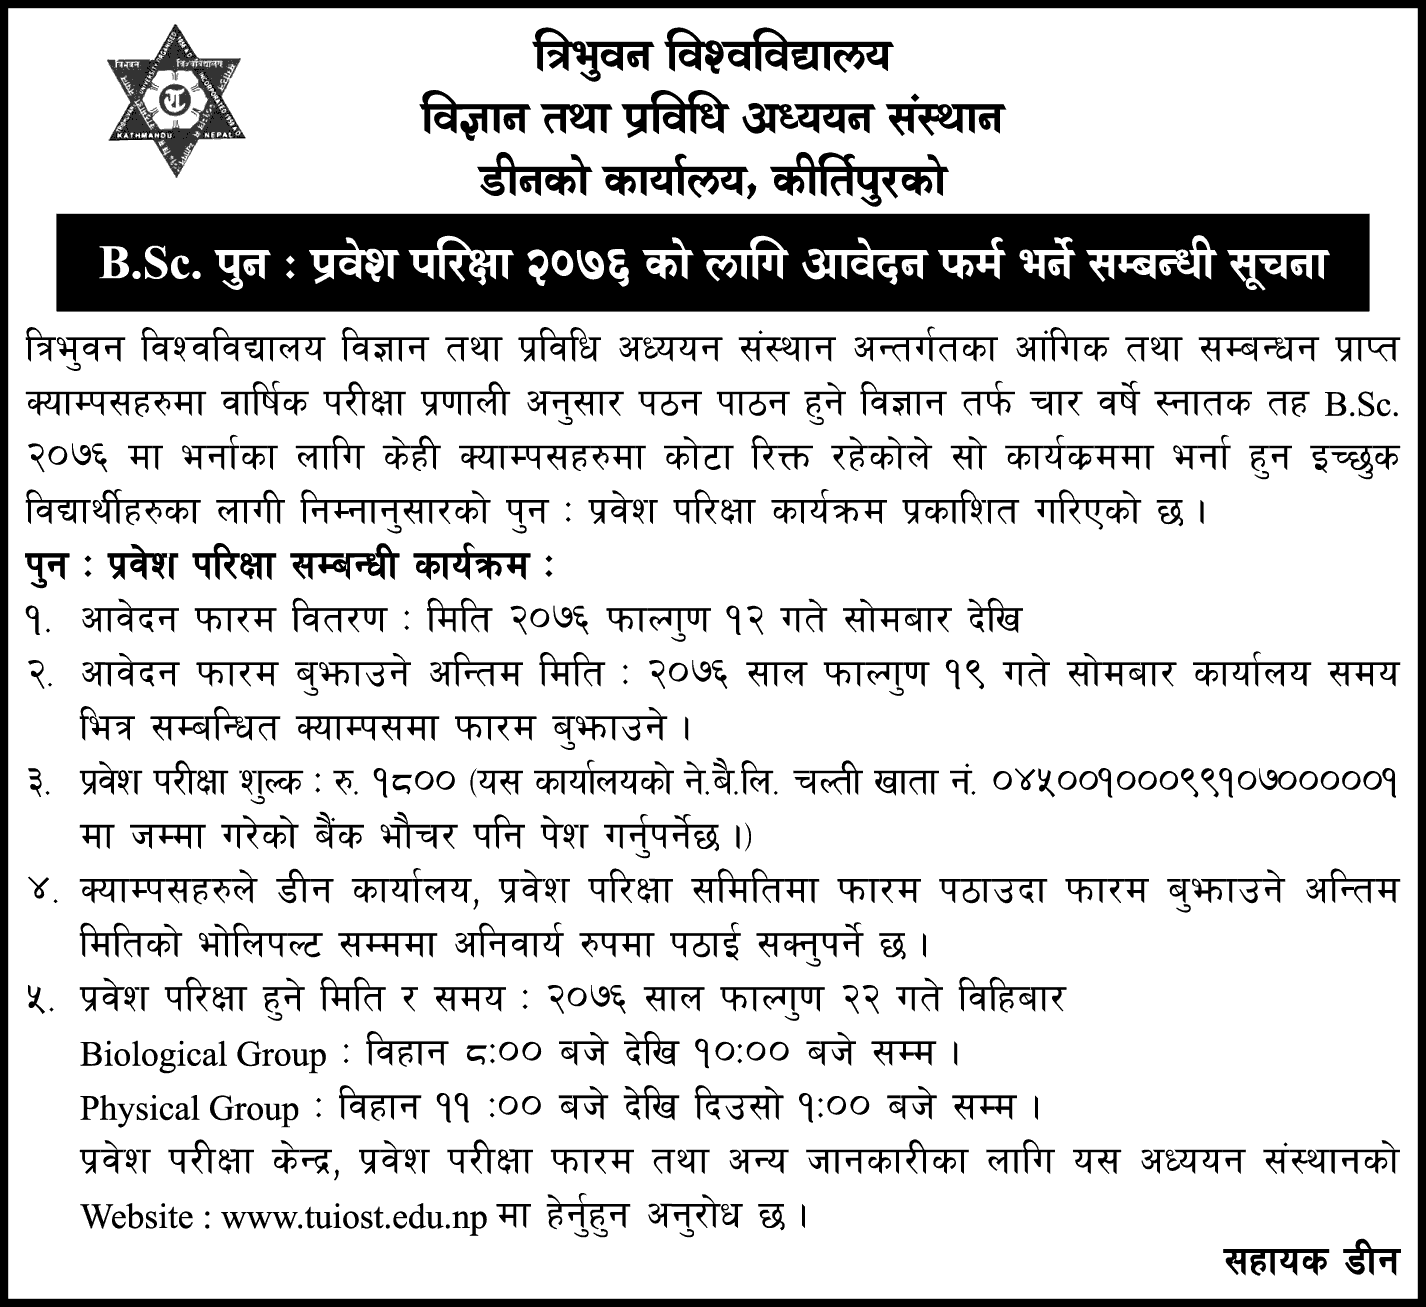 Bachelor of Science (B.Sc) Re-Entrance Exam Notice